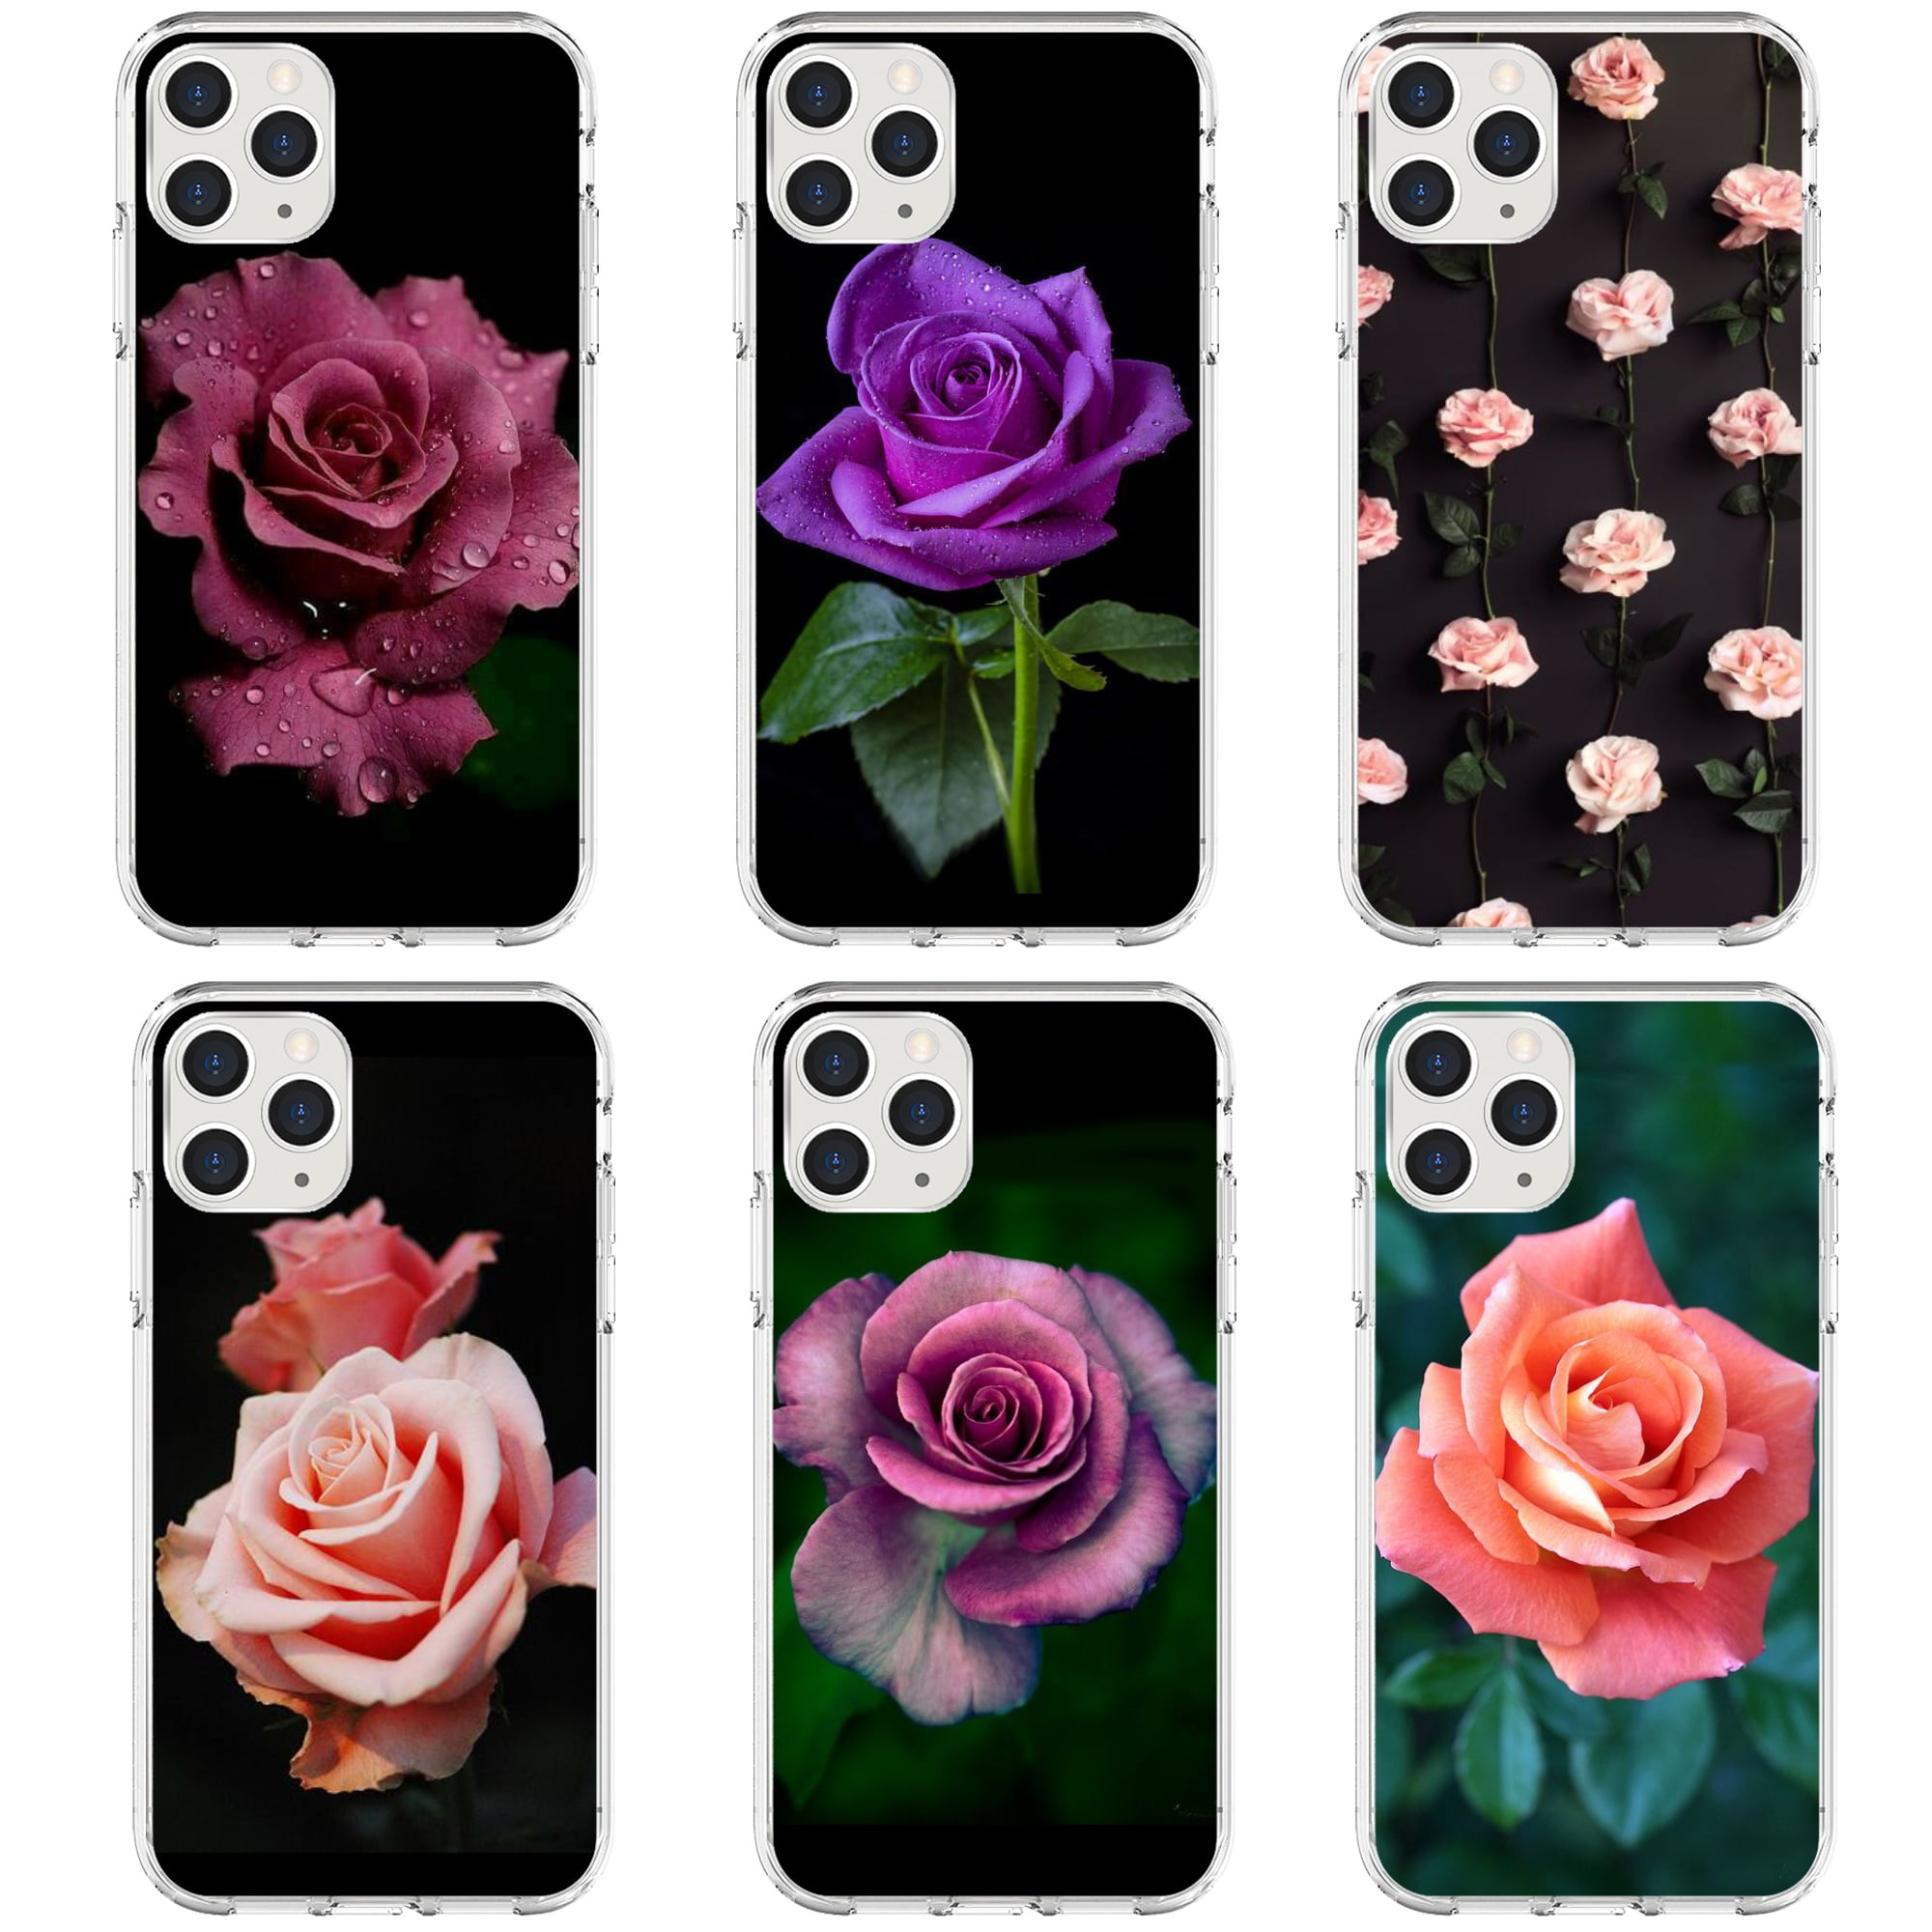 Pink Love Heart  Hard & Leather Flip Case iPhone 11 12 Pro Max Samsung Galaxy S21 Note A71 A50 A51 A20 A21s Google Pixel